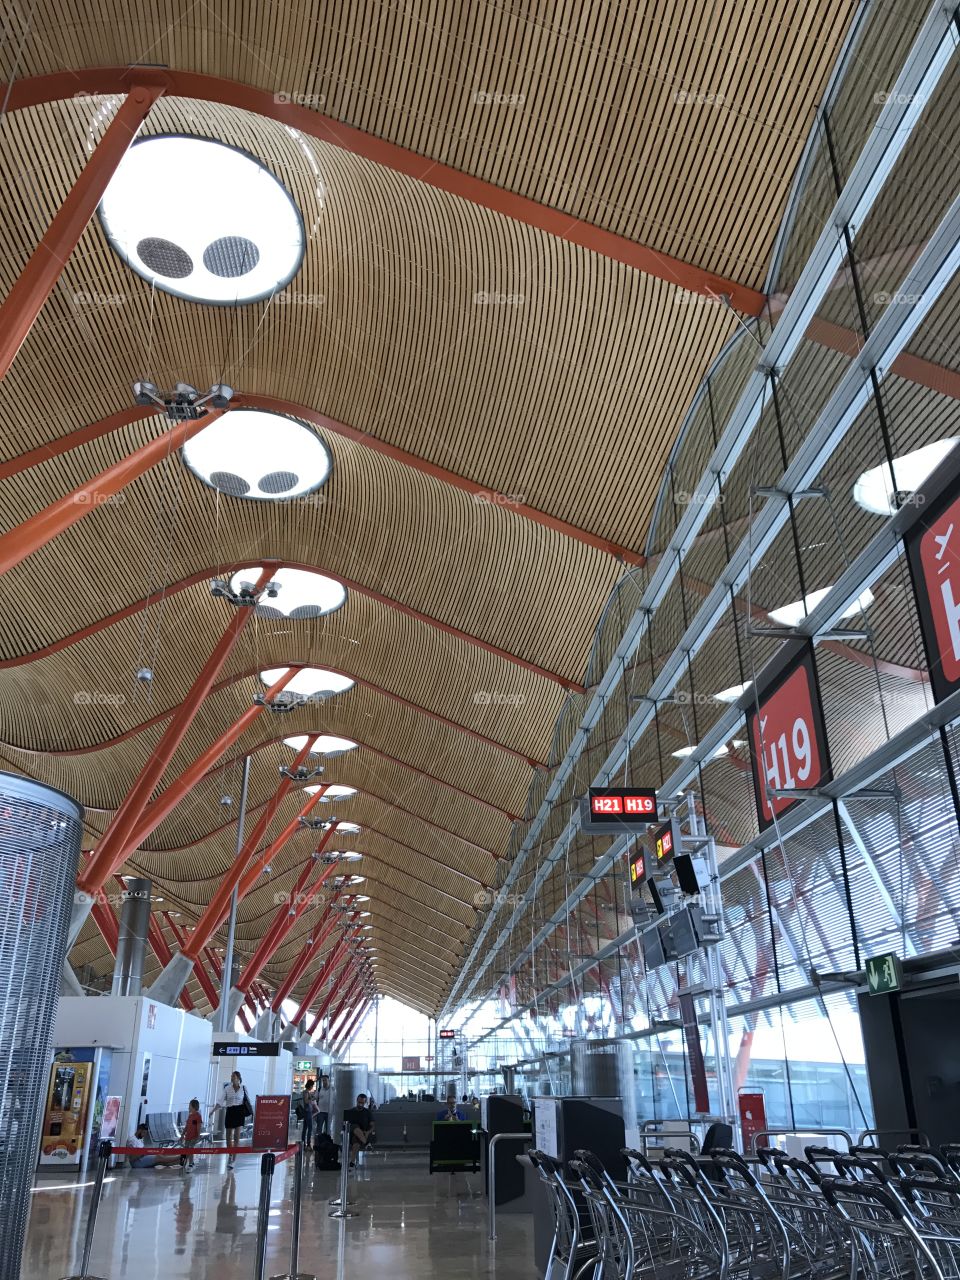 Ceiling lamps and windows at Madrid airport 